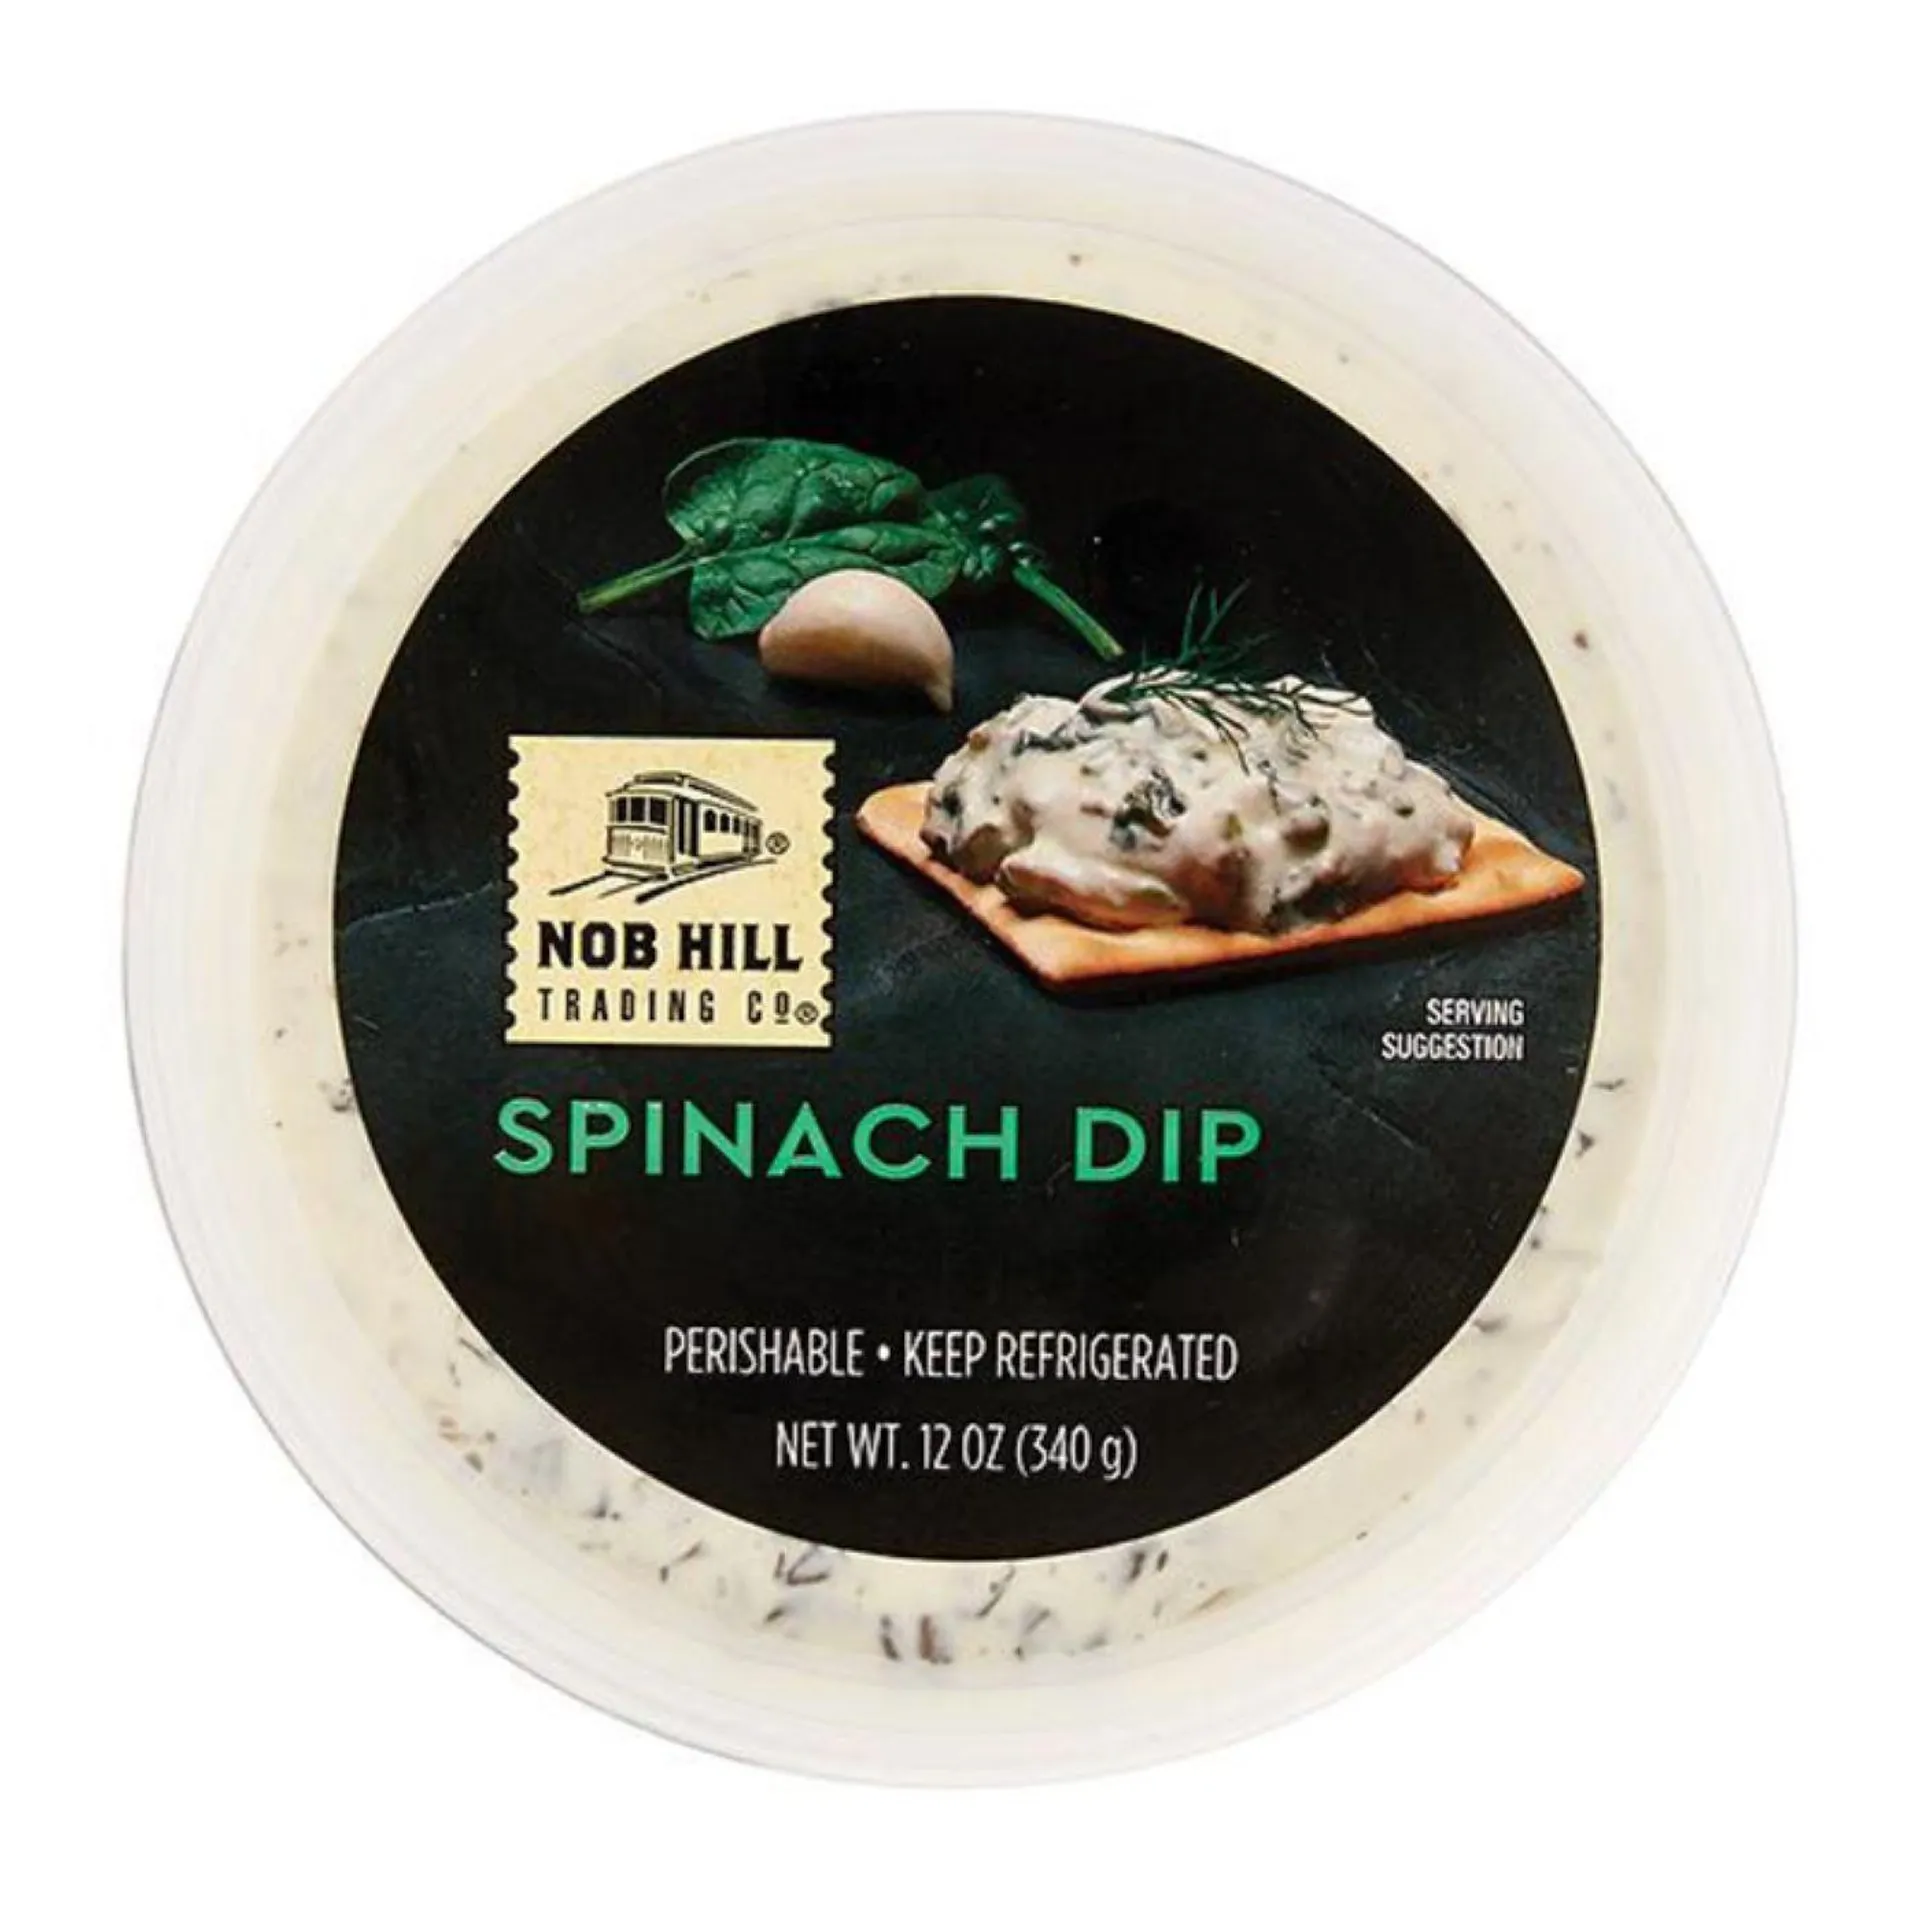 Nob Hill Trading Co. Spinach Dip